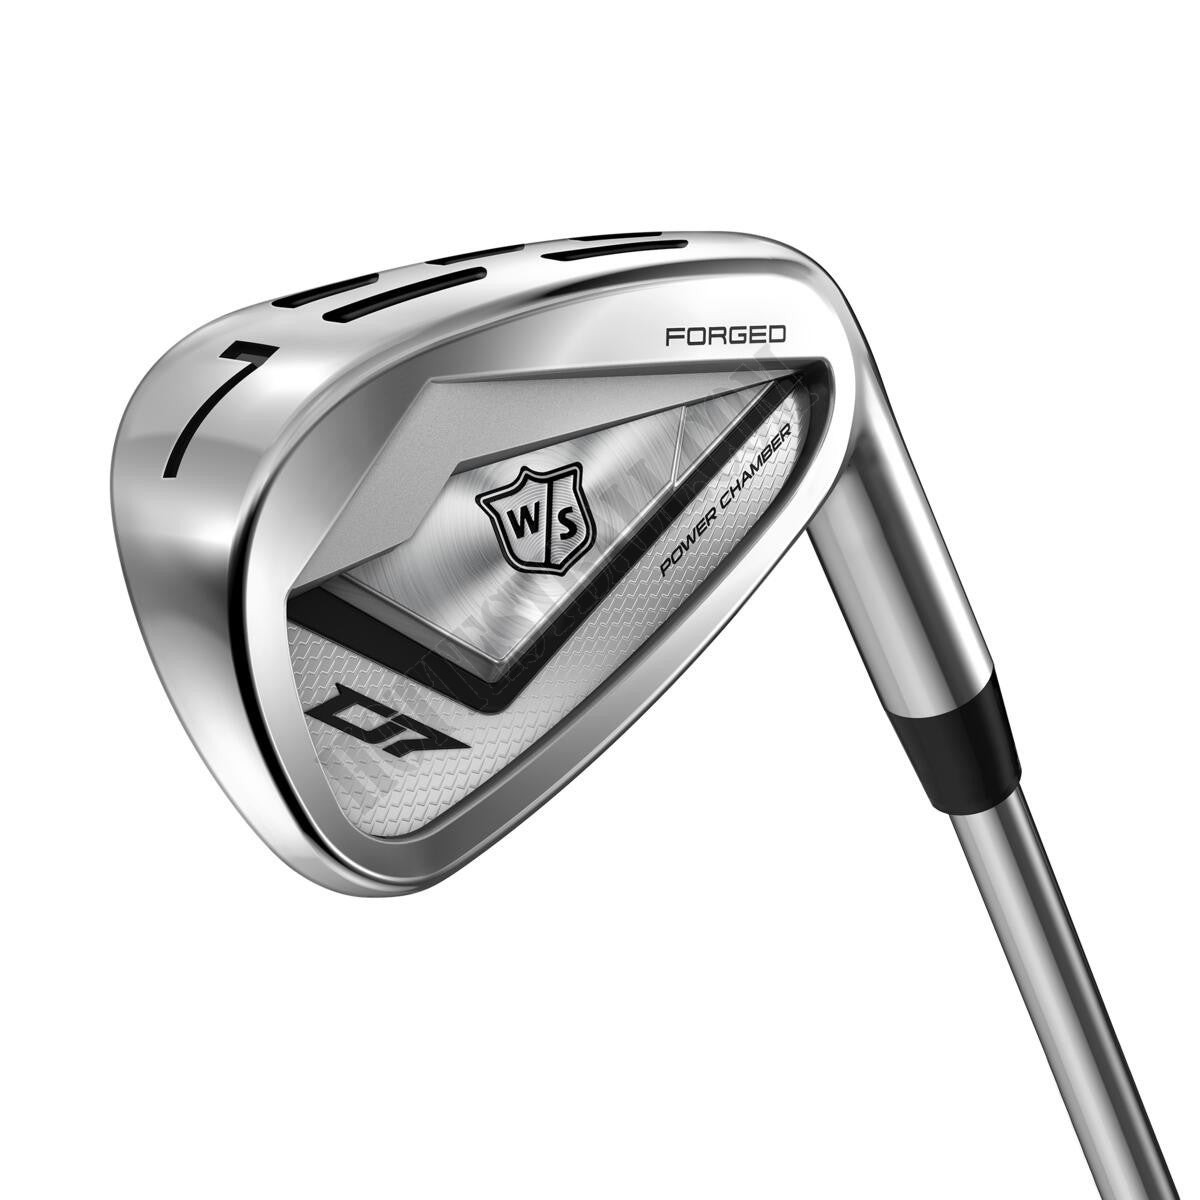 Wilson Staff D7 Forged Irons - Steel (4-PW) - Wilson Discount Store - Wilson Staff D7 Forged Irons - Steel (4-PW) - Wilson Discount Store